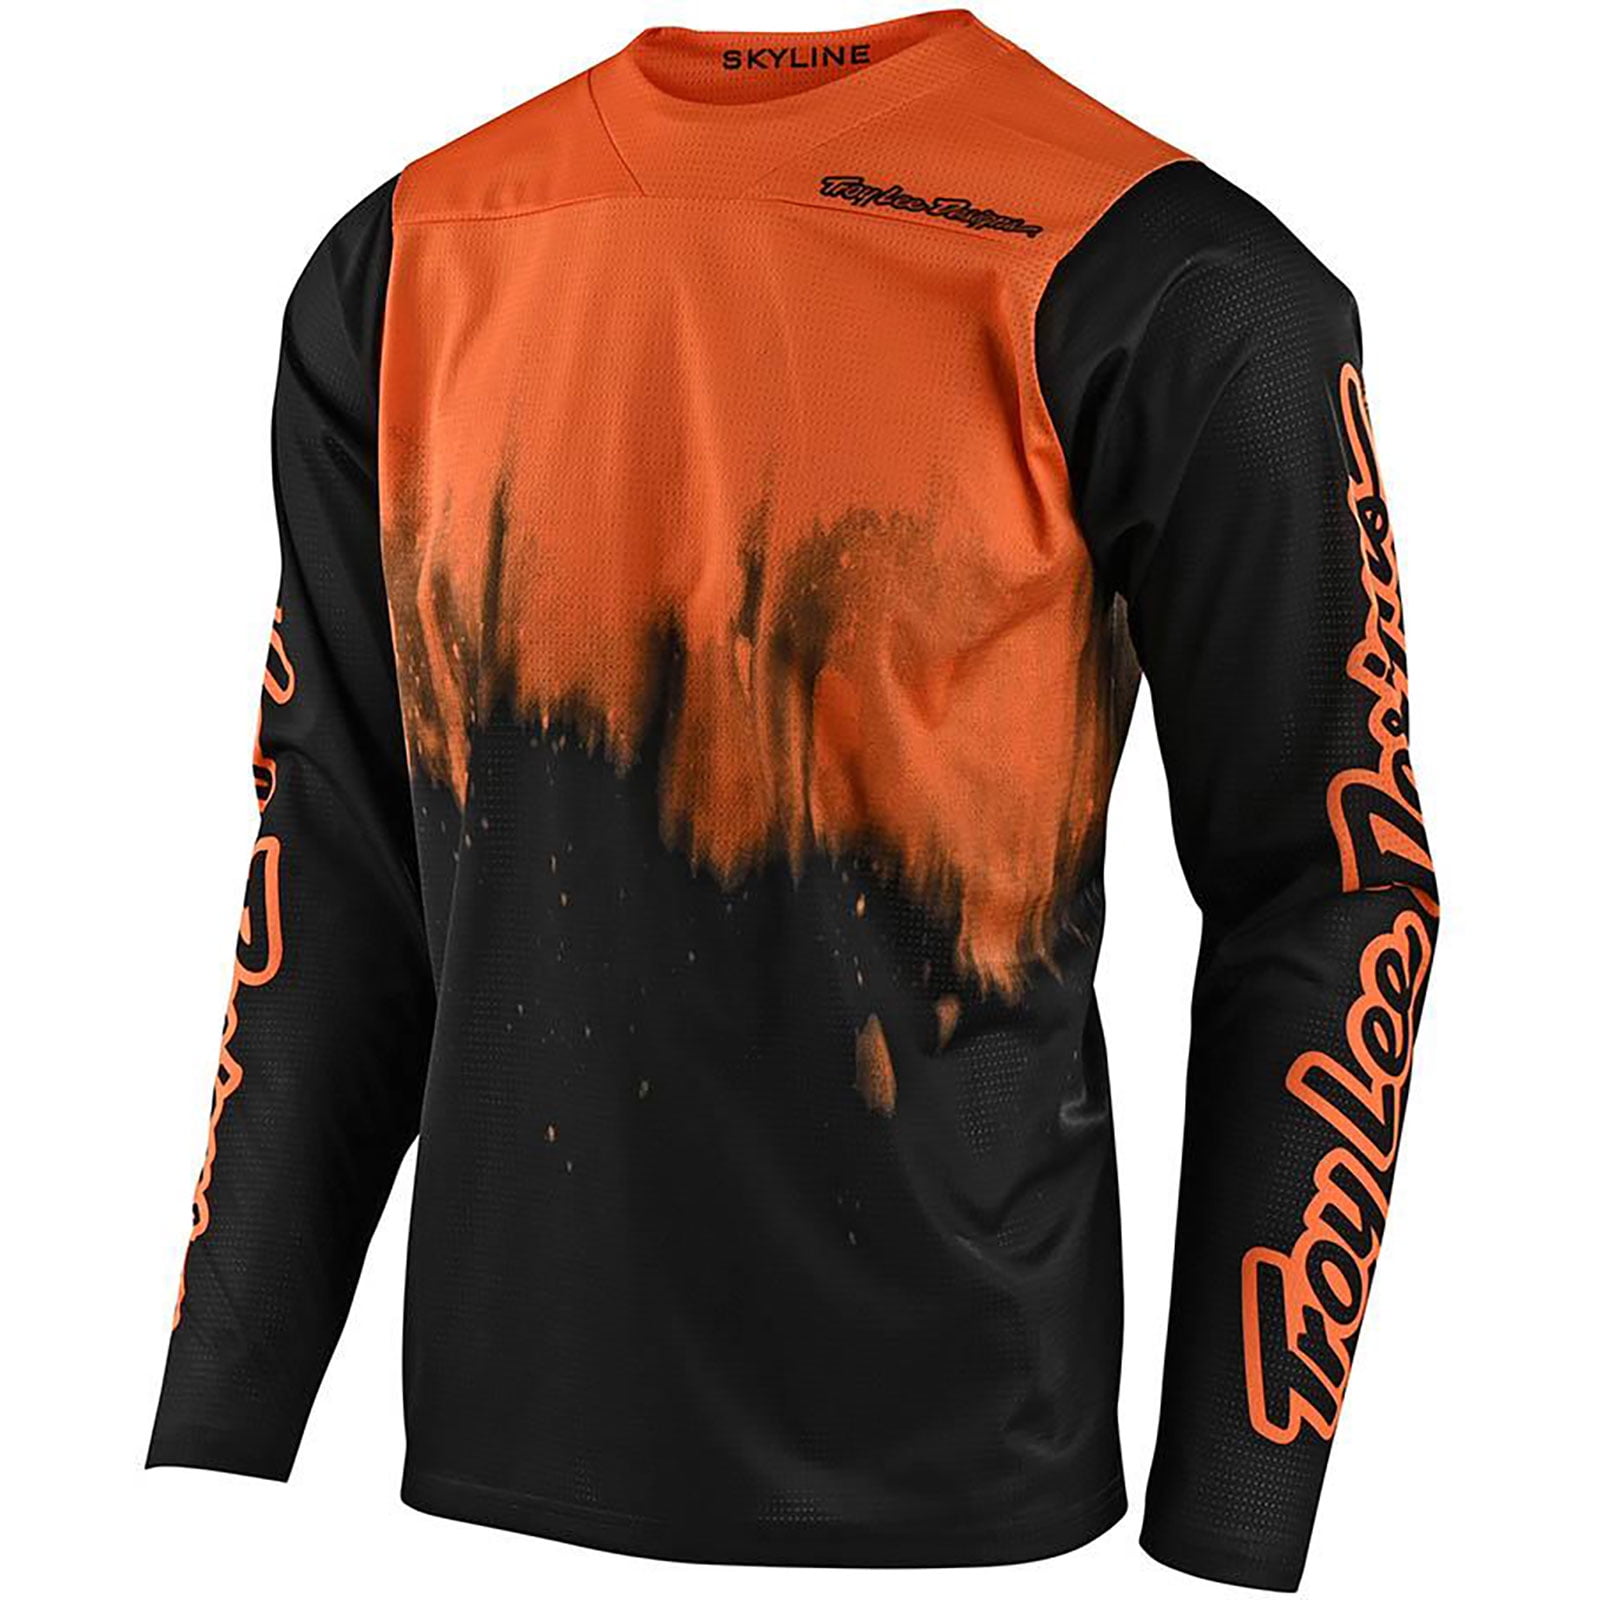 Troy Lee Designs Skyline Solid Womens BMX Racing Jersey